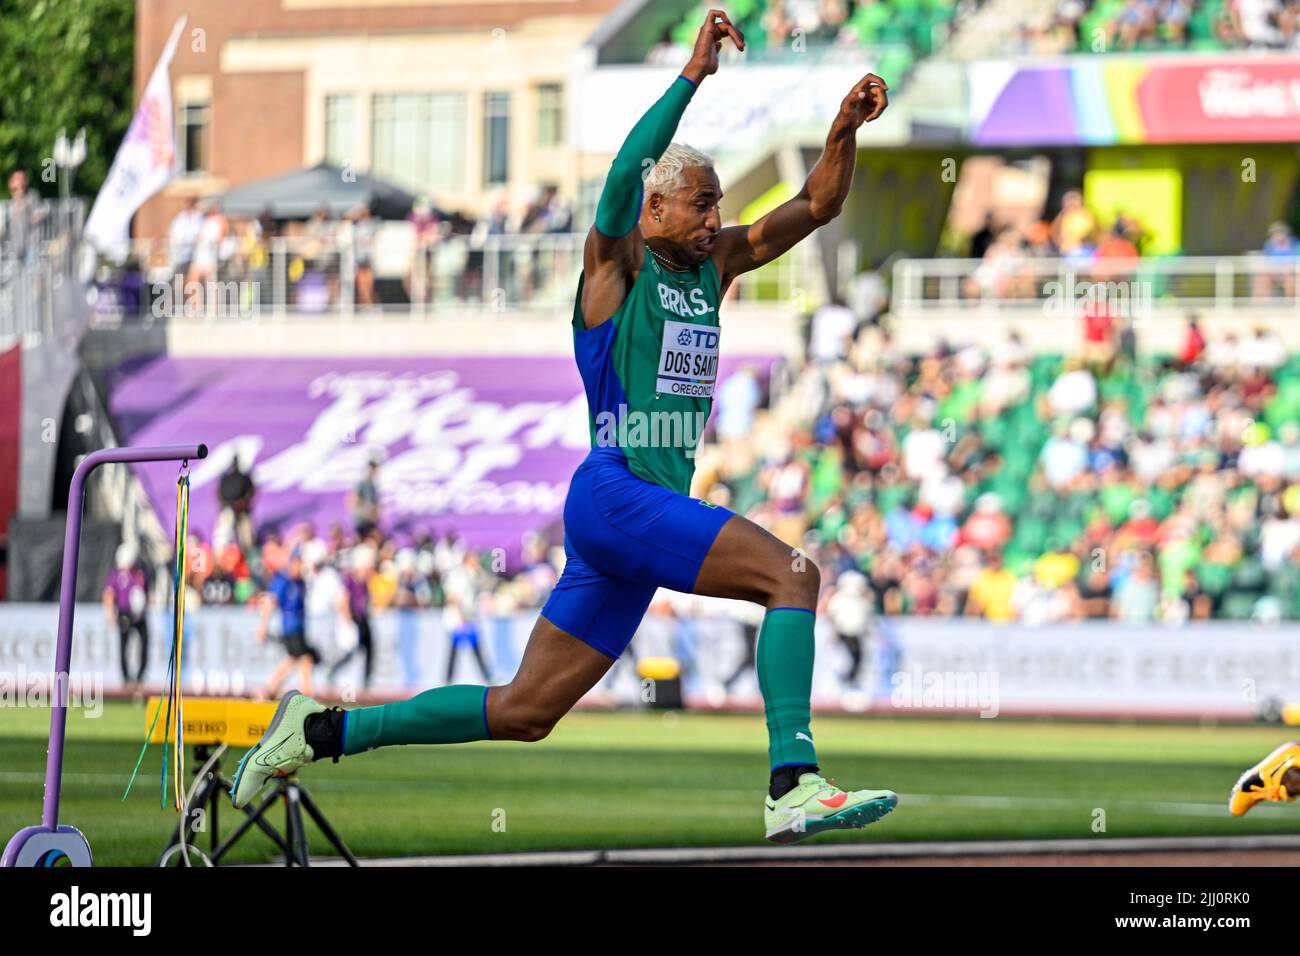 EUGENE, UNITED STATES - JULY 21: Almir Dos Santos of Brazil competing on Men's triple jump during the World Athletics Championships on July 21, 2022 in Eugene, United States (Photo by Andy Astfalck/BSR Agency) Atletiekunie Stock Photo